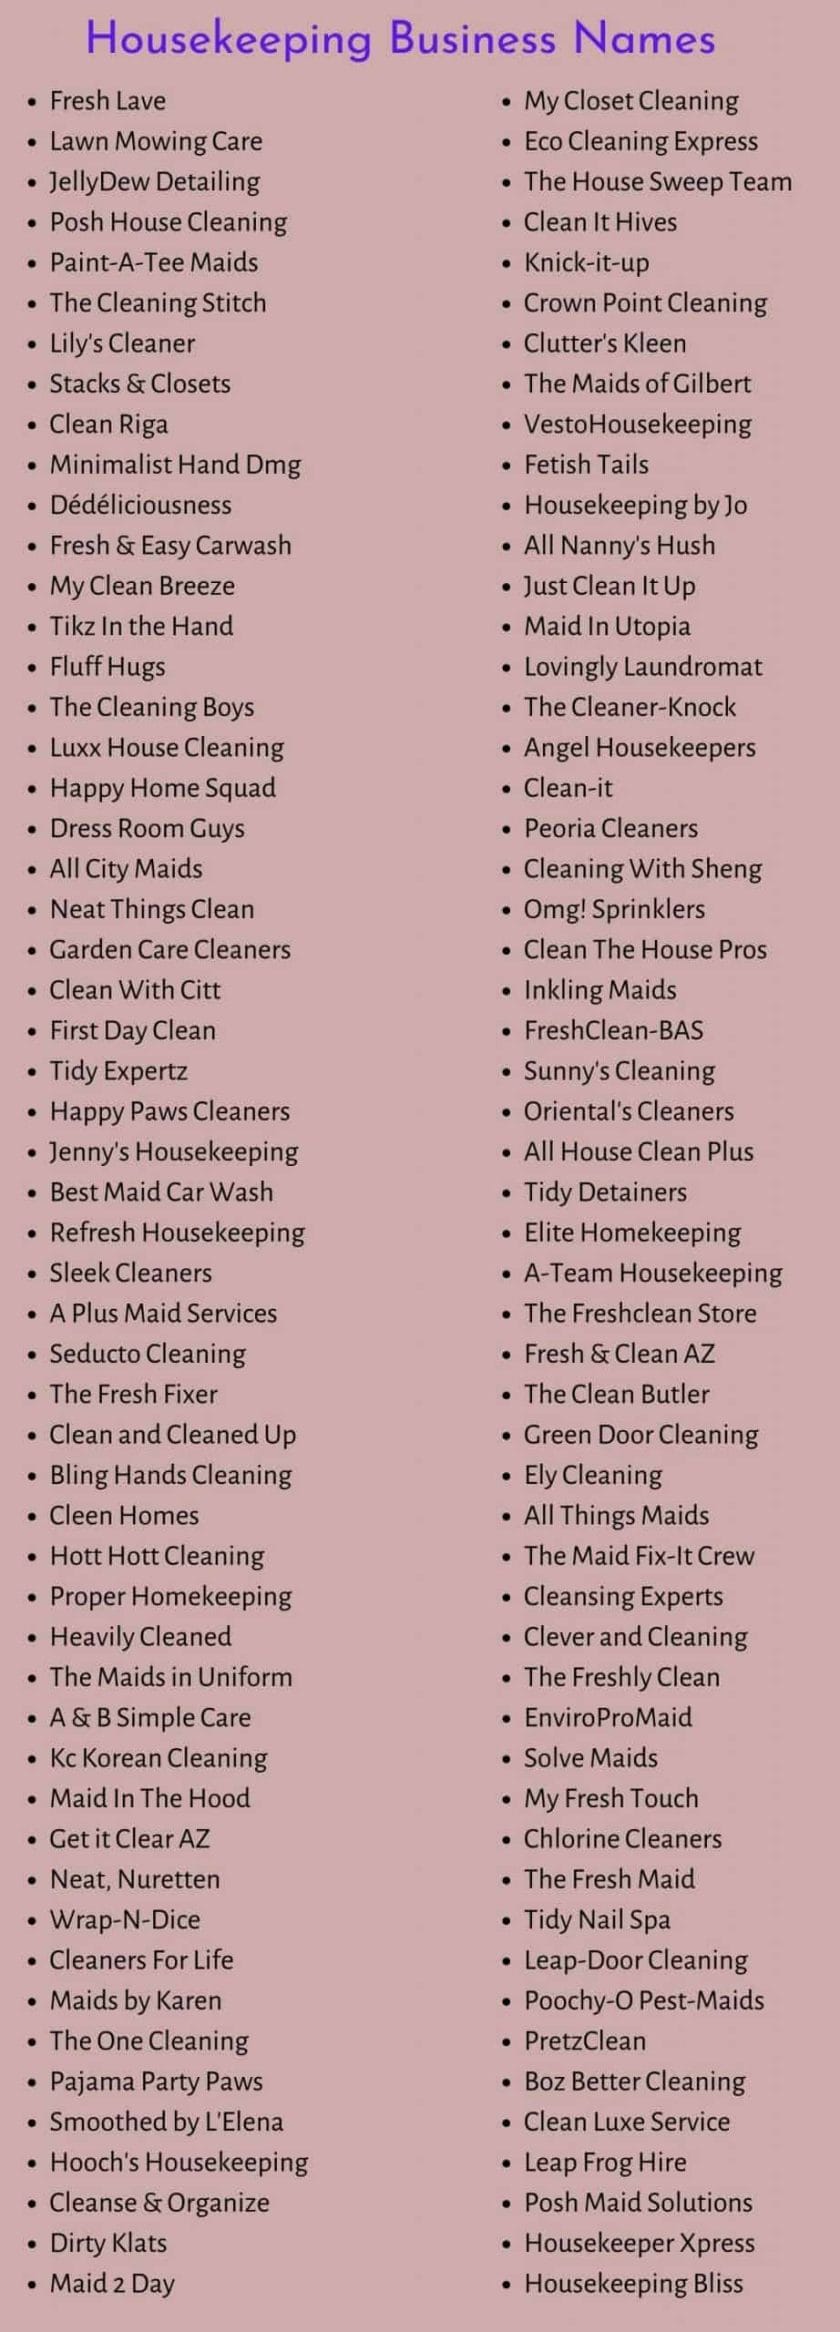 300 Catchy Housekeeping Business Names